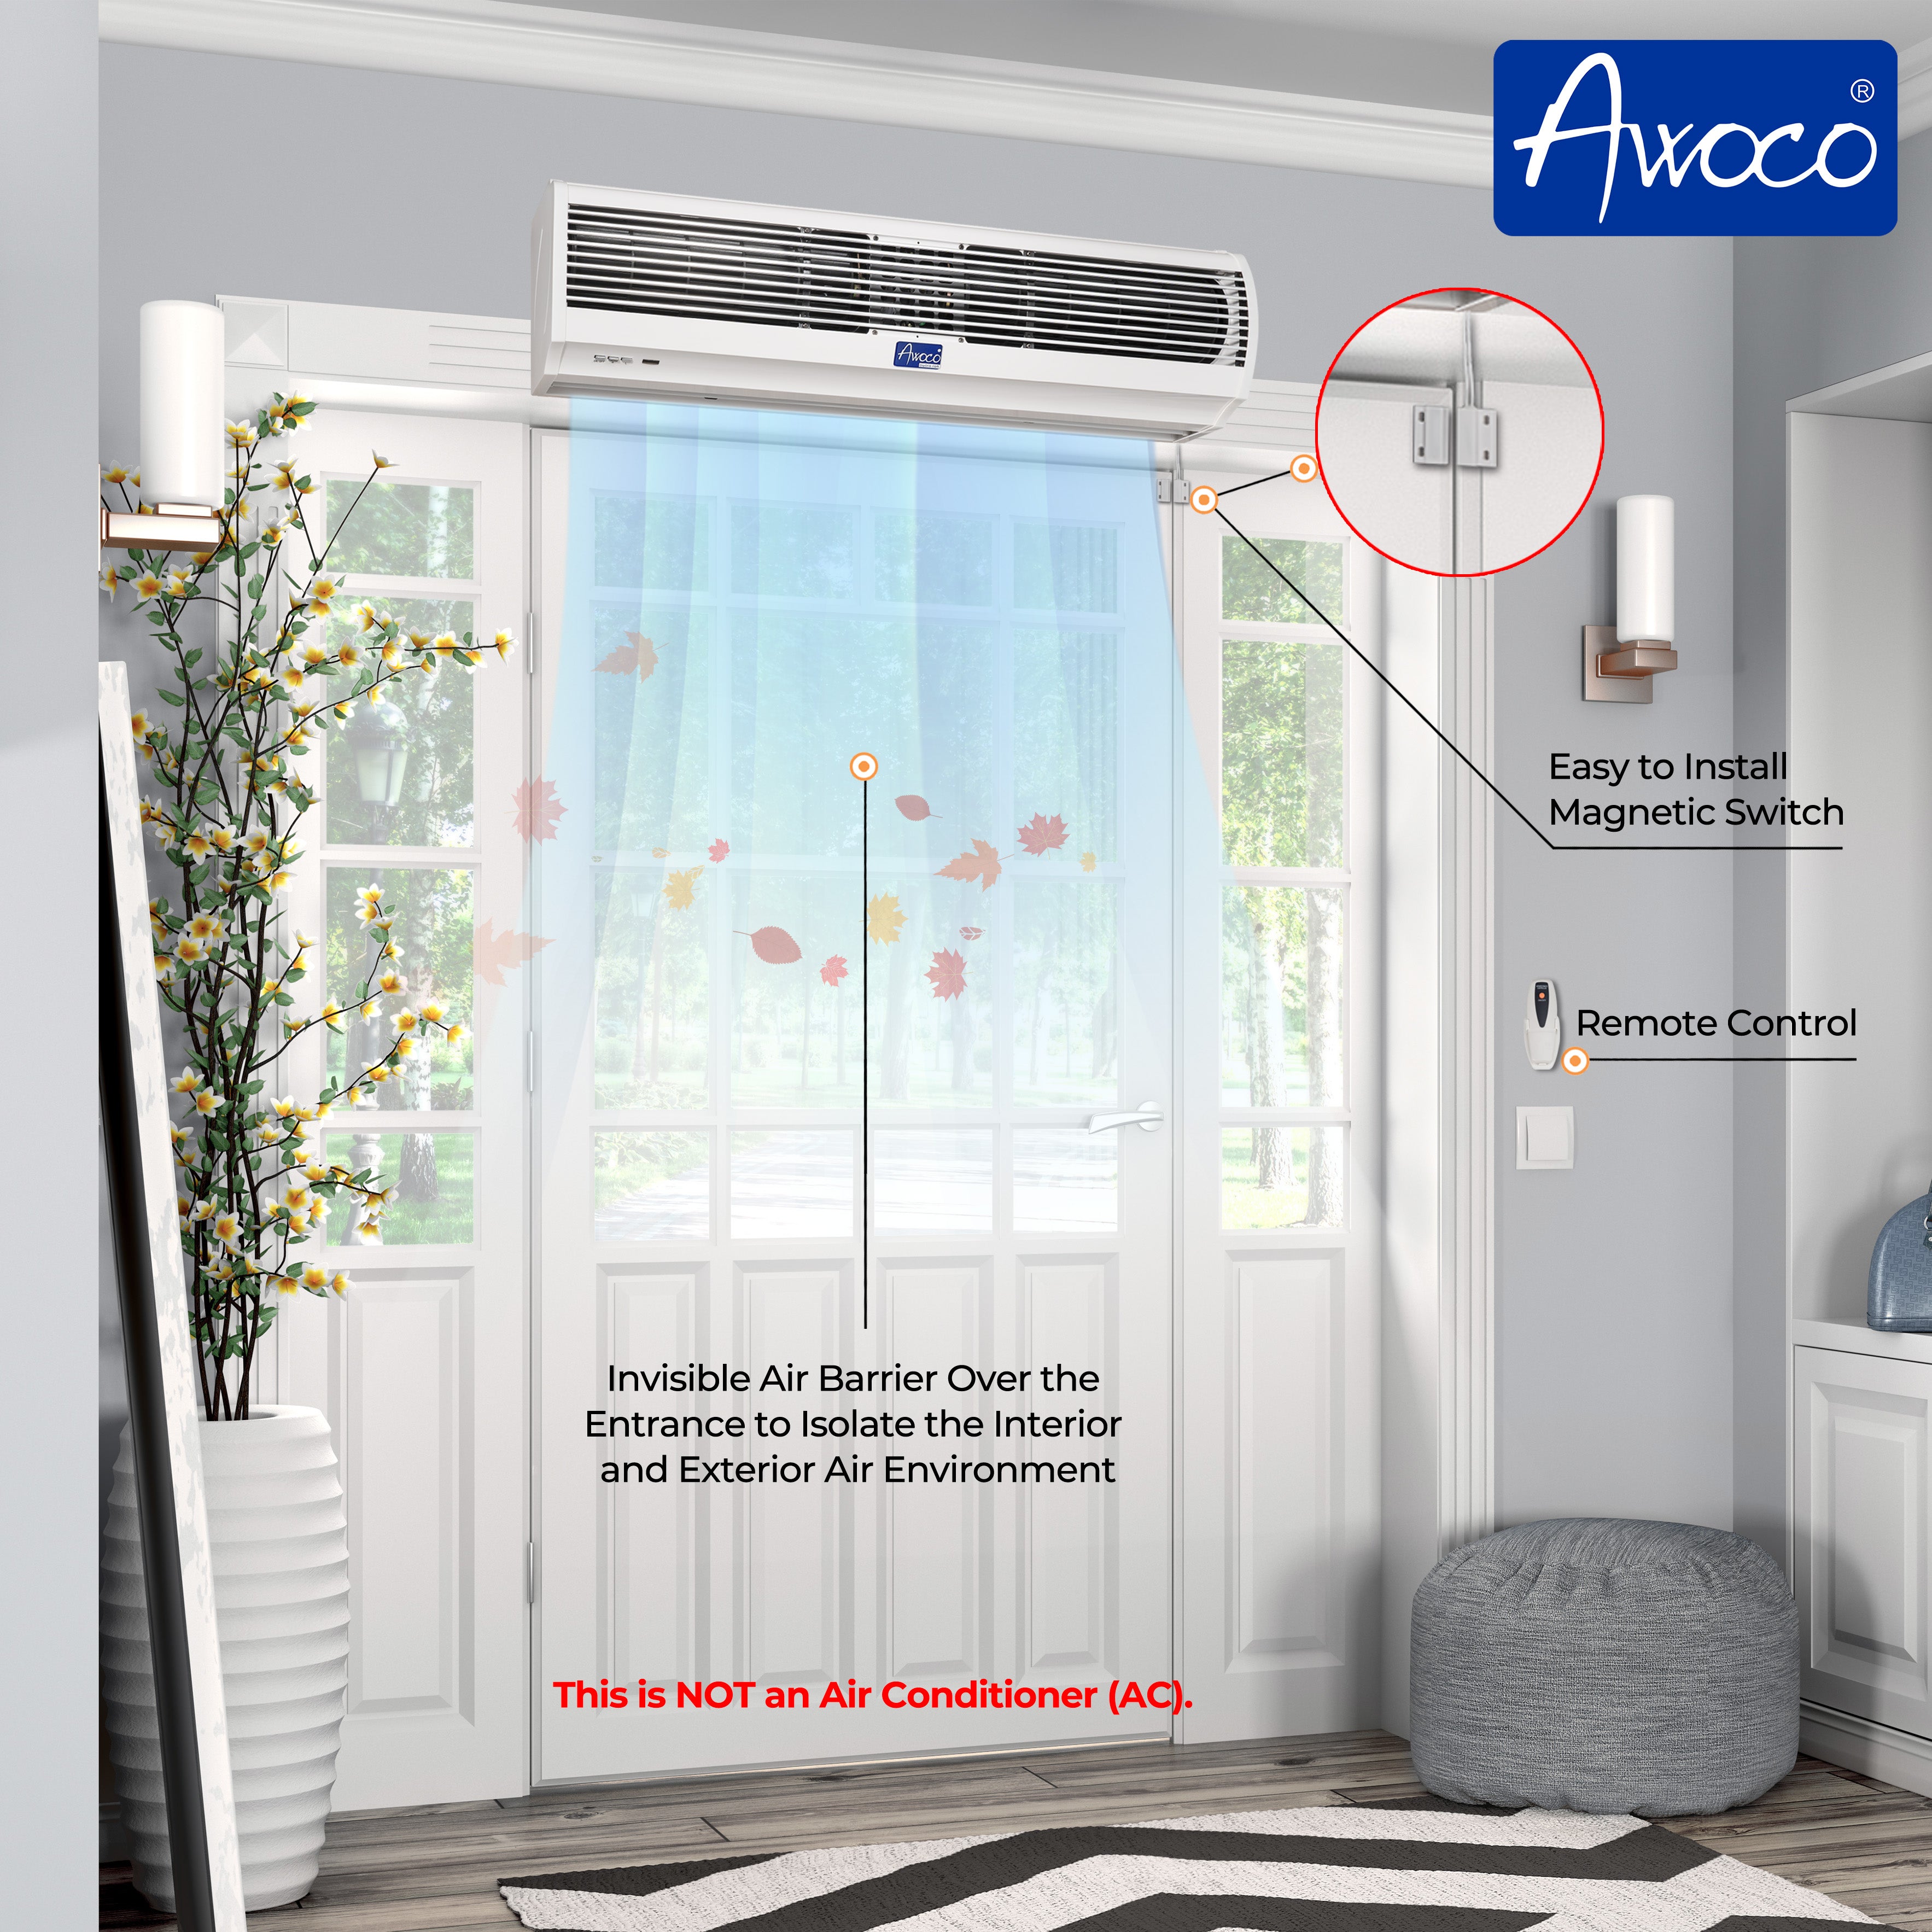 Awoco 40” Slimline 2 Speeds 1250 CFM Indoor Air Curtain, CE Certified, 120V Unheated with Remote Control and Magnetic Switch, Powerful, Quiet, Small Body, Light Weight, 3 Year Warranty